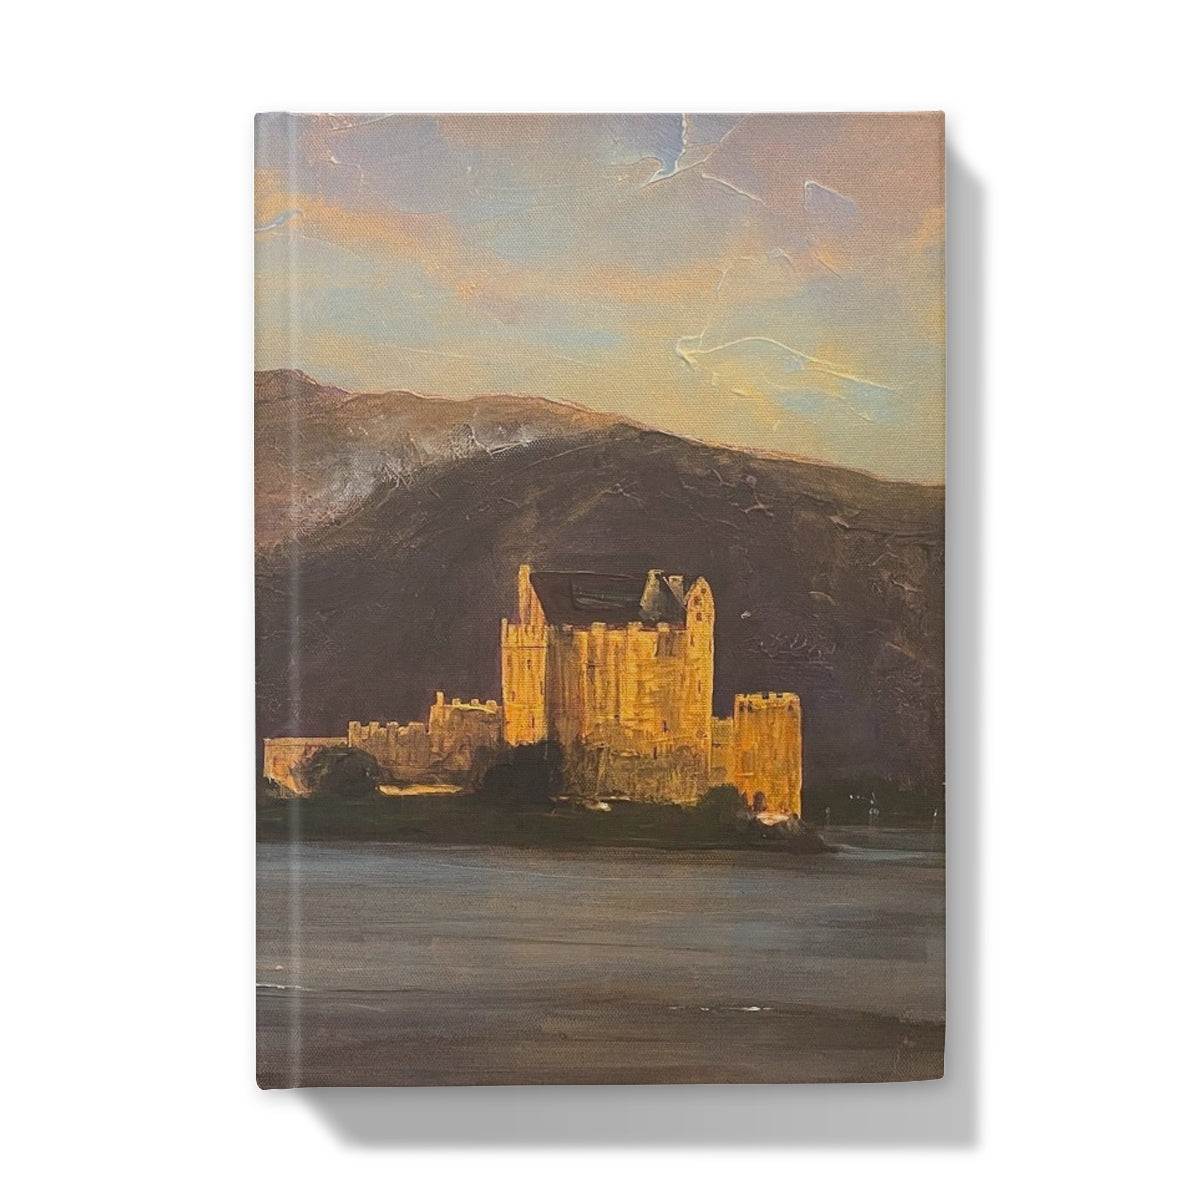 Eilean Donan Castle Art Gifts Hardback Journal-Journals & Notebooks-Historic & Iconic Scotland Art Gallery-A5-Lined-Paintings, Prints, Homeware, Art Gifts From Scotland By Scottish Artist Kevin Hunter